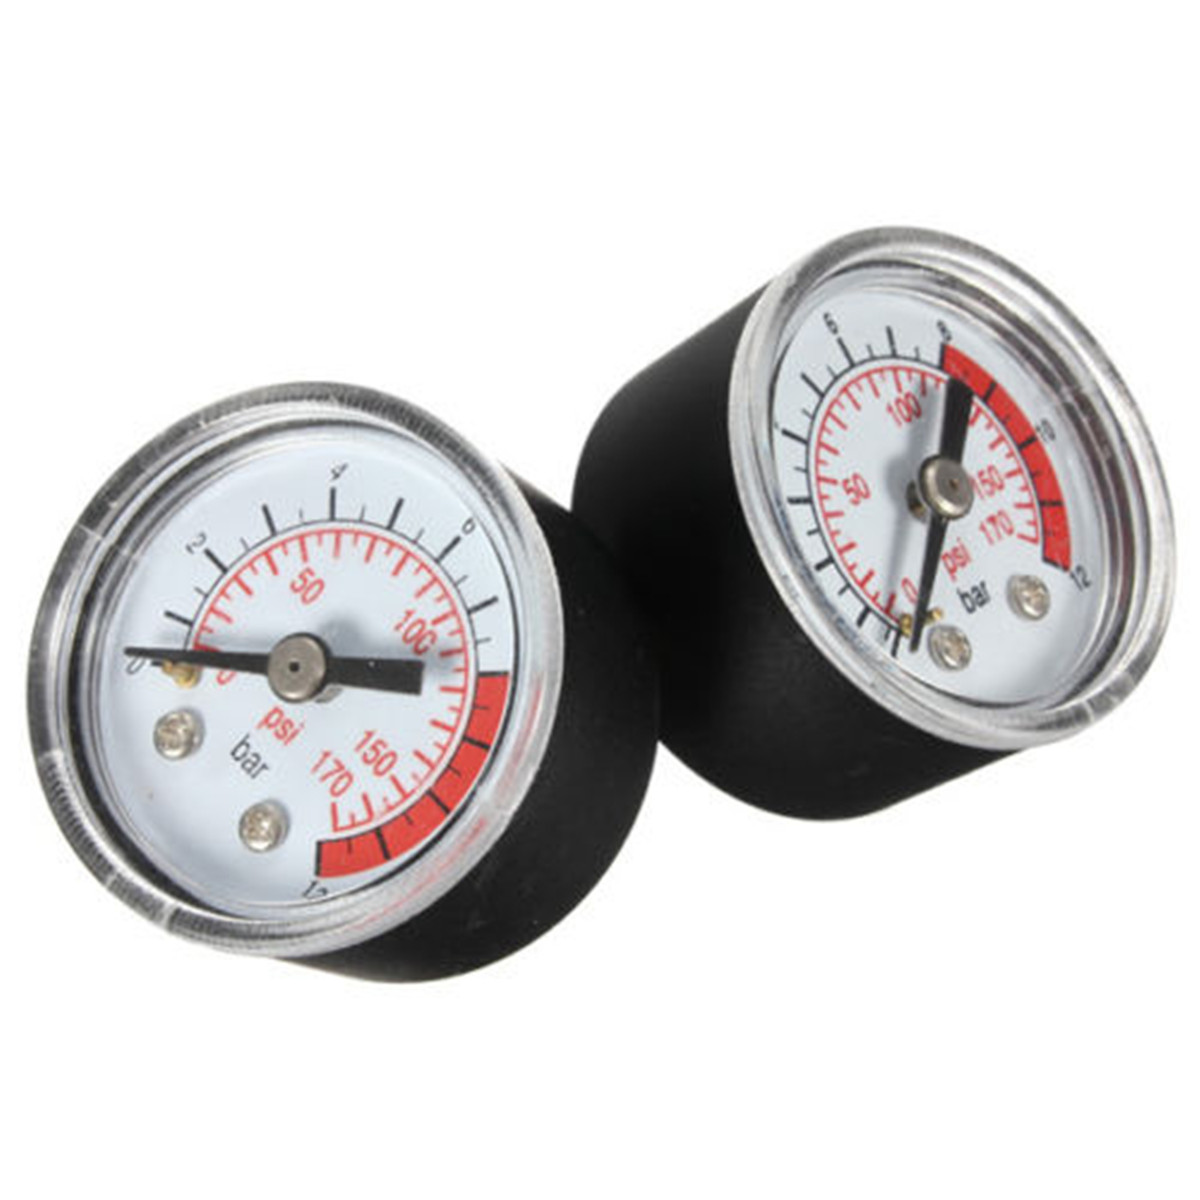 Find Regulator Air Compressor Pump Pressure Control Switch Valve Gauge Heaty Duty for Sale on Gipsybee.com with cryptocurrencies